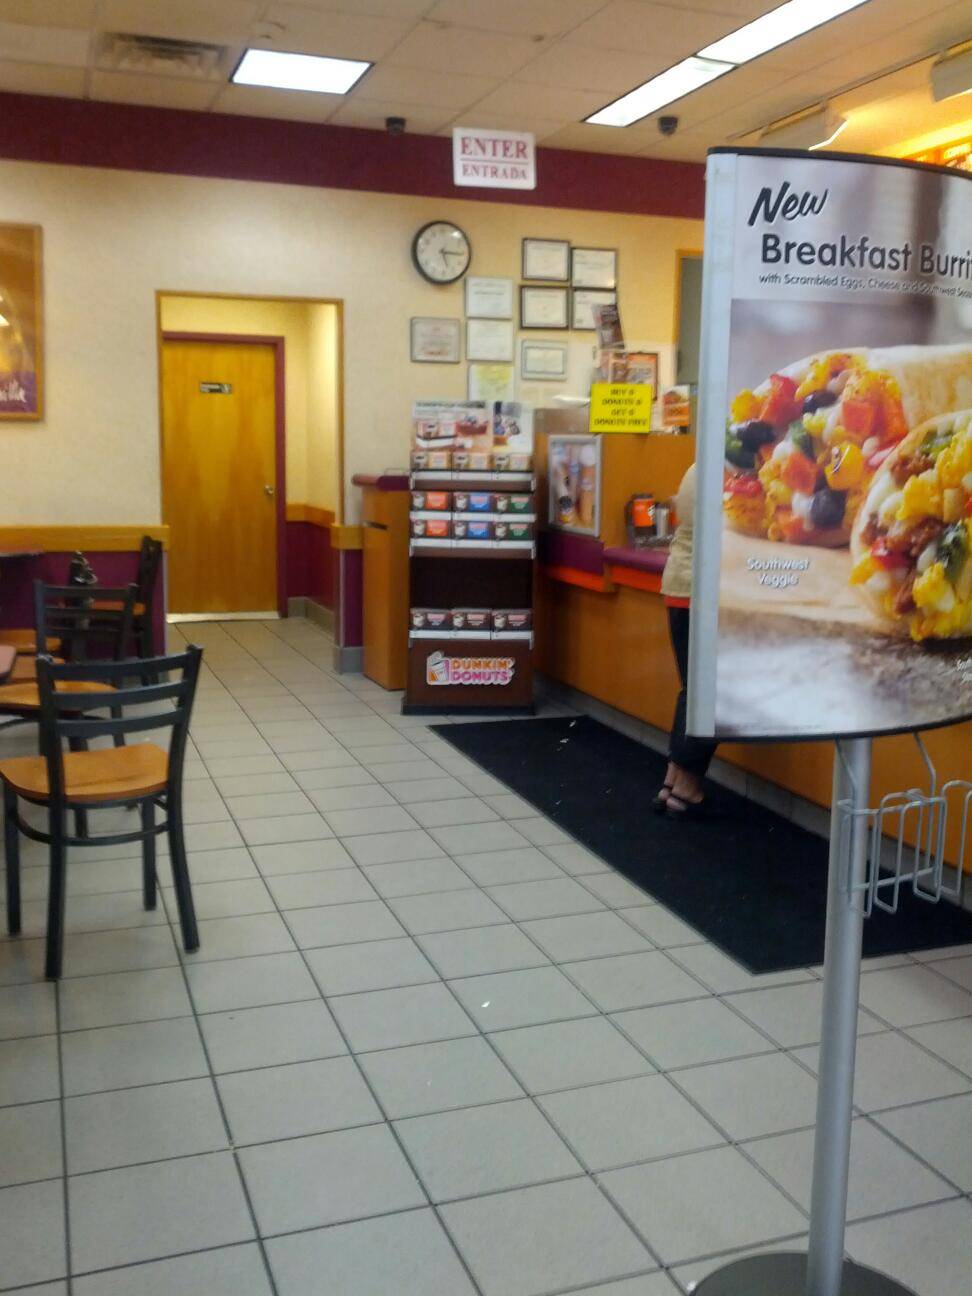 Dunkin Donuts | cafe | 3606 Bergenline Ave, Union City, NJ 07087, USA | 2018667646 OR +1 201-866-7646